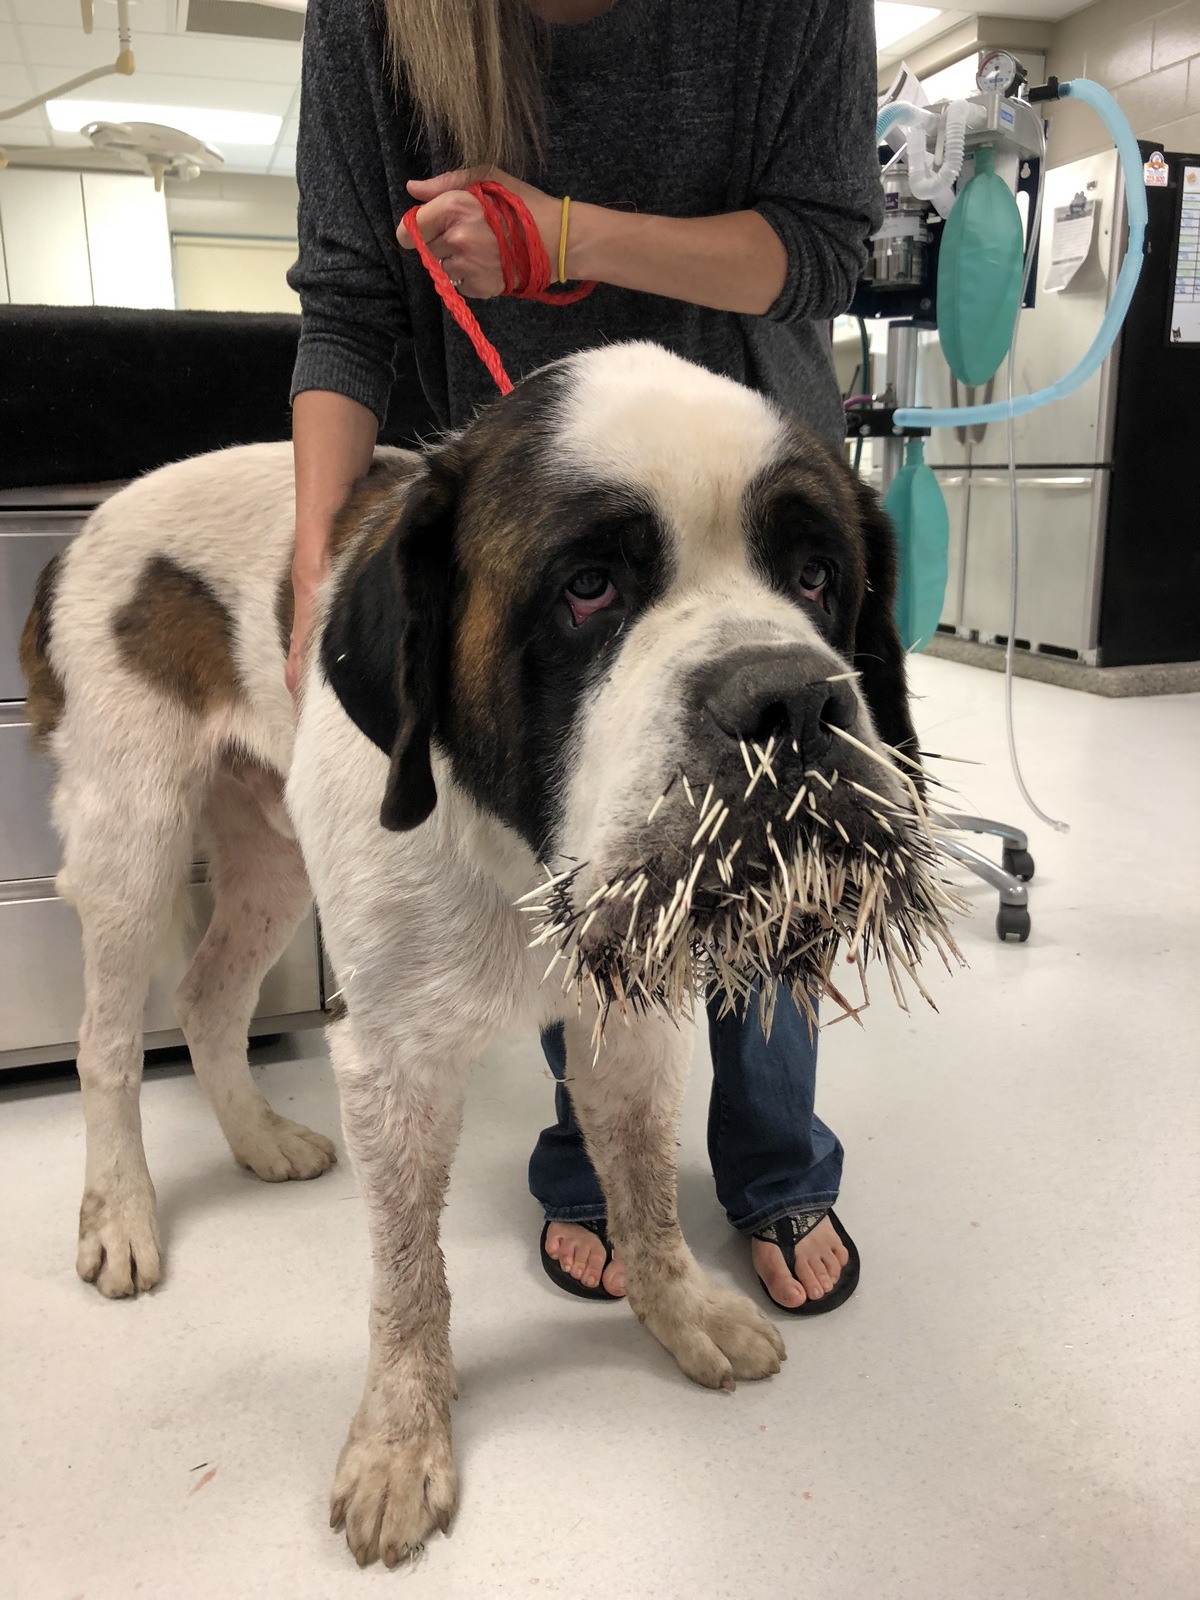 Porcupine Quills in Dogs: How to Remove Them